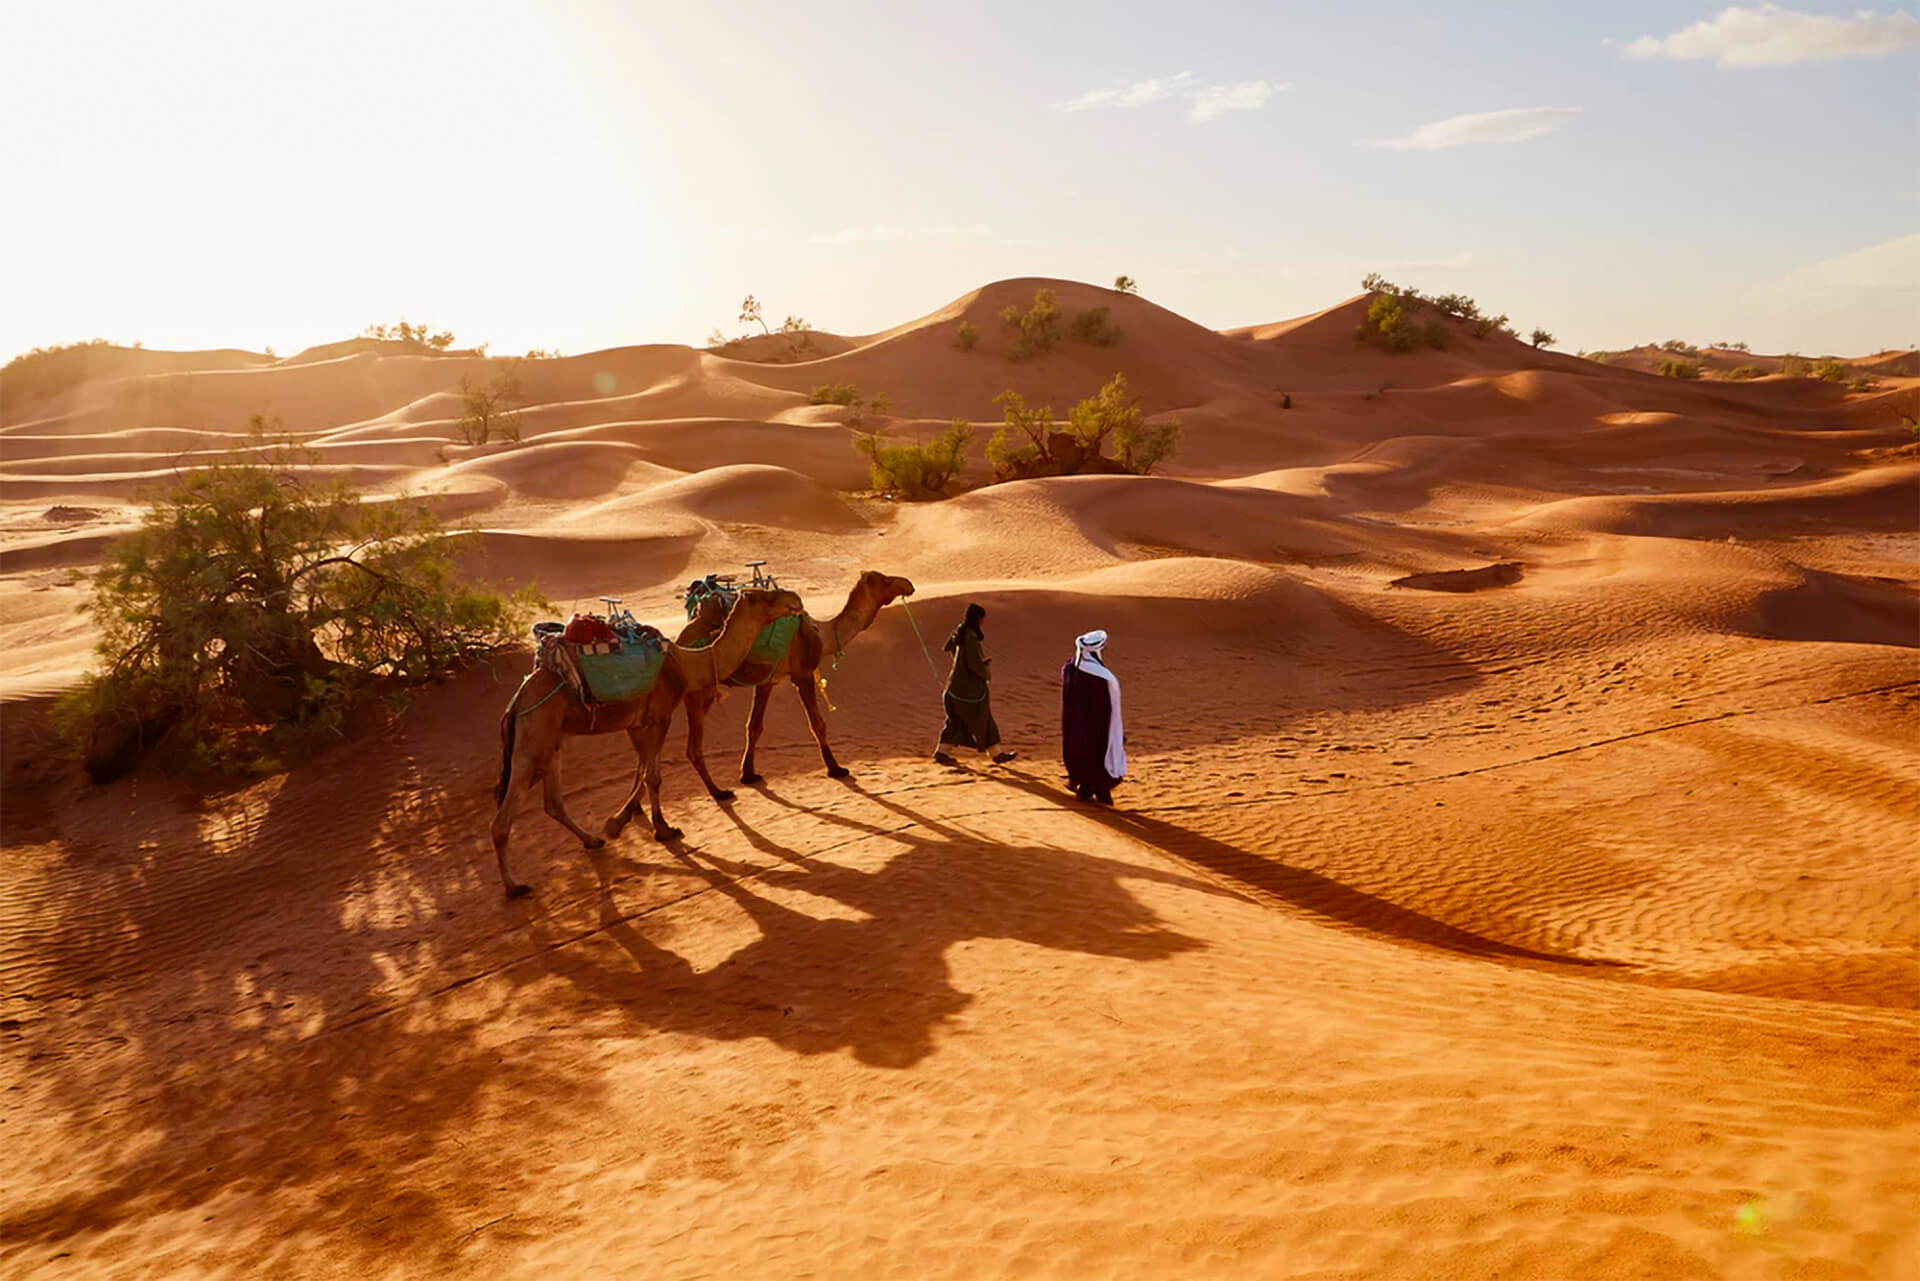 Bible Women - Walking in Desert with Camels